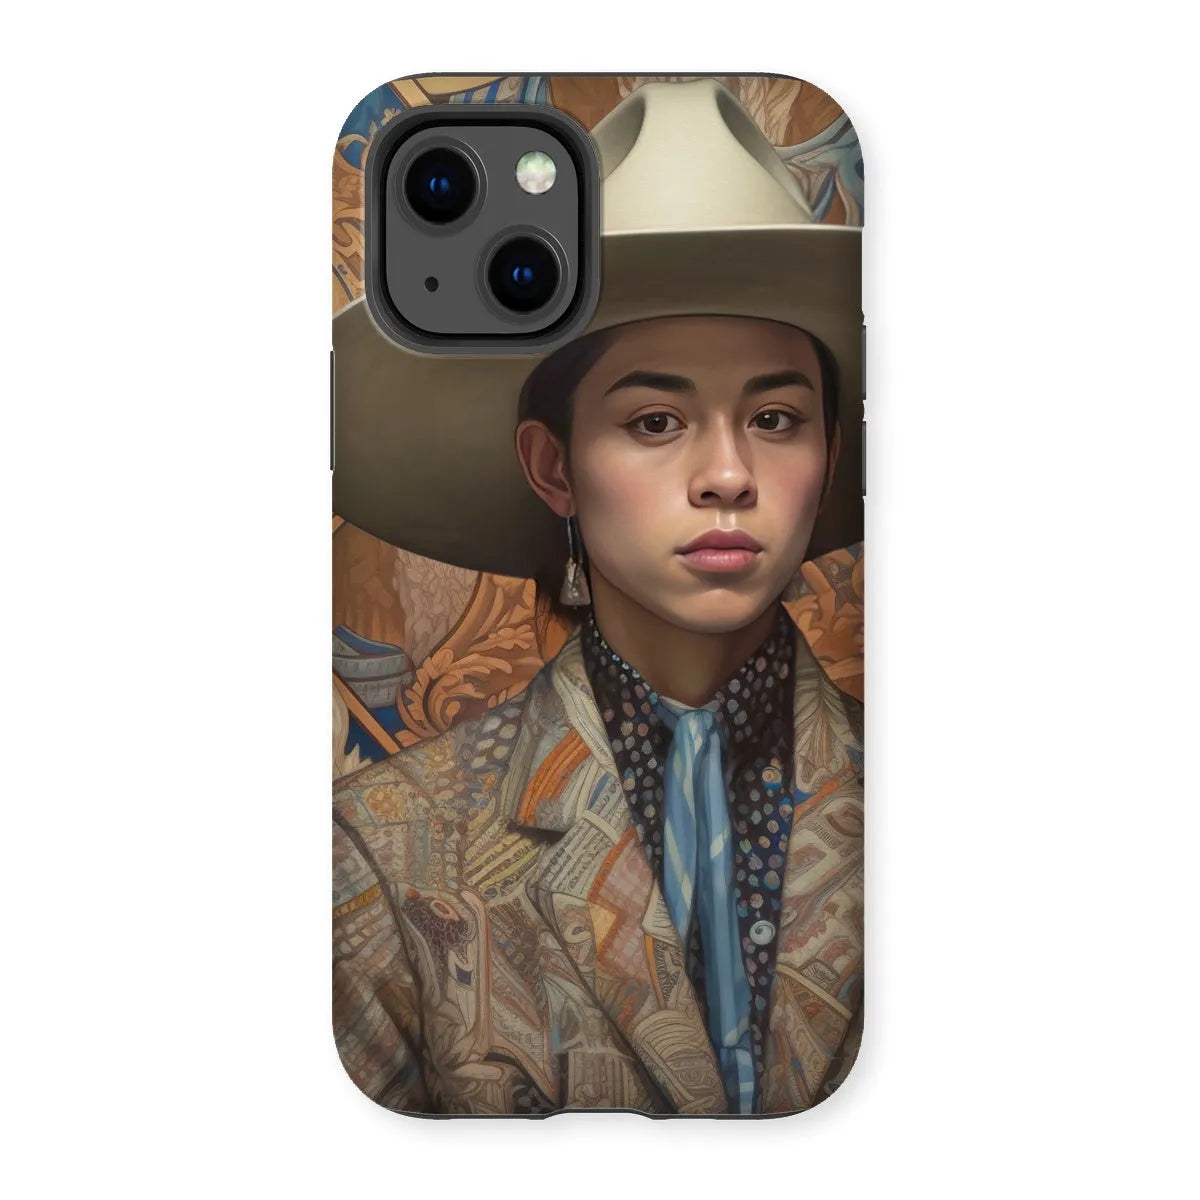 Angel The Transgender Cowboy - F2m Outlaw Art Phone Case - Iphone 13 / Matte - Mobile Phone Cases - Aesthetic Art